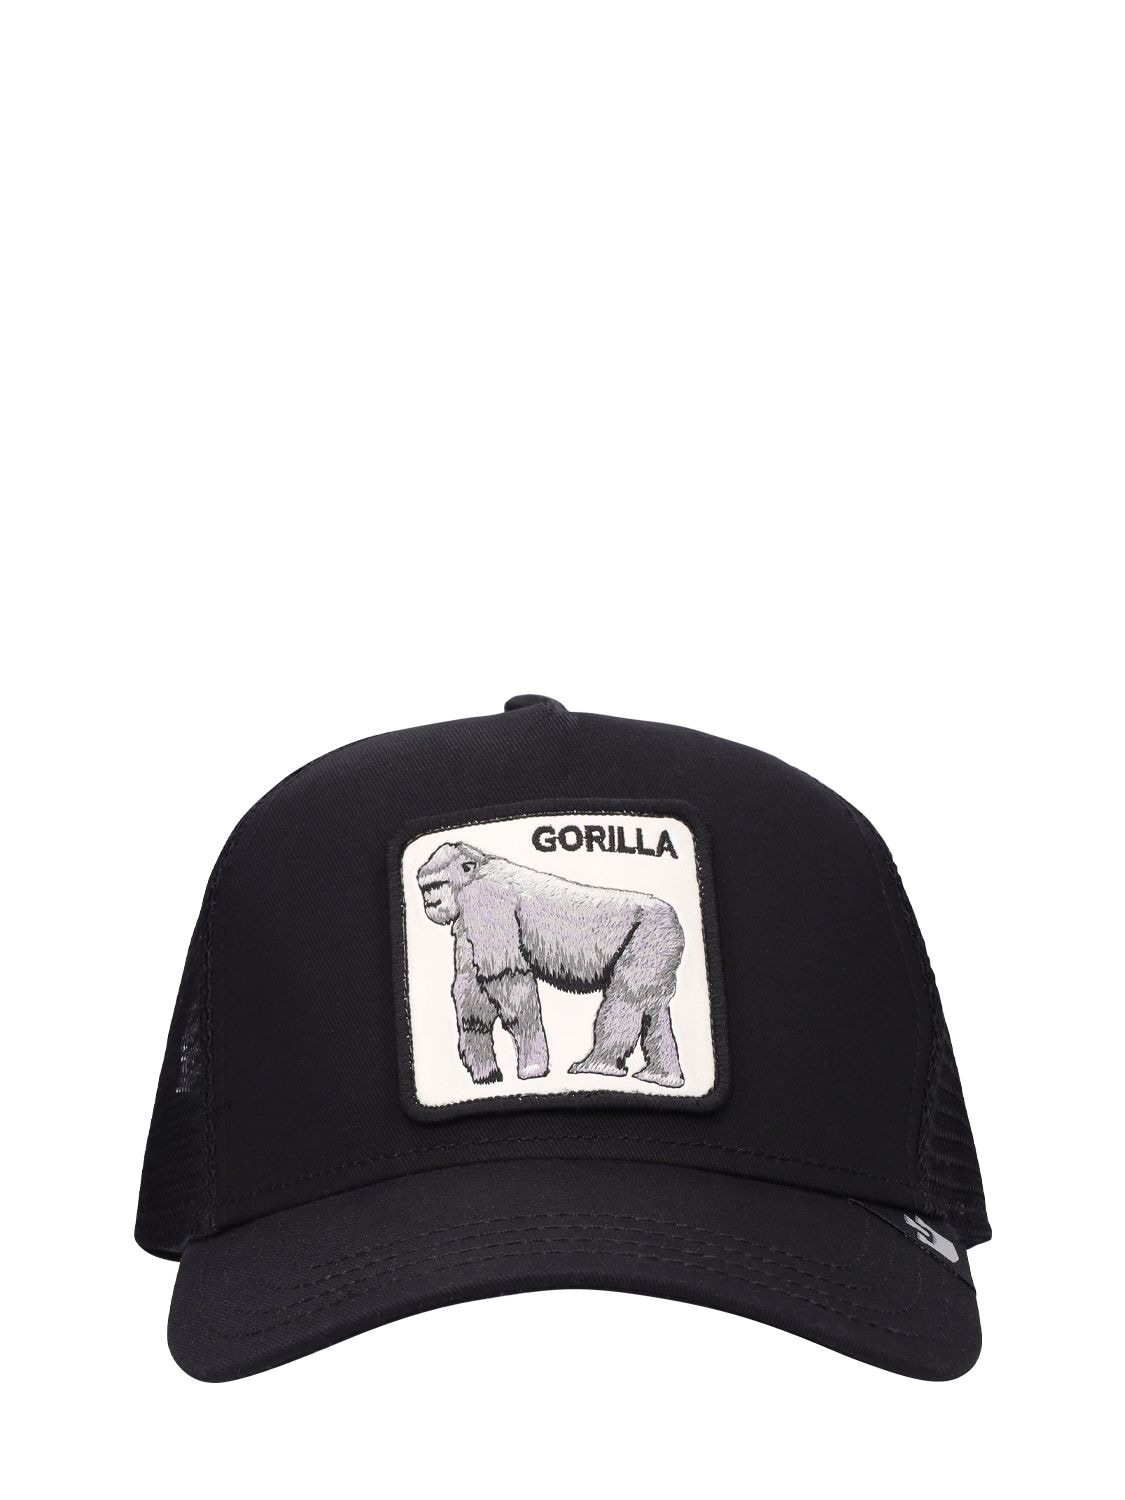 Image of The Gorilla Trucker Hat W/patch